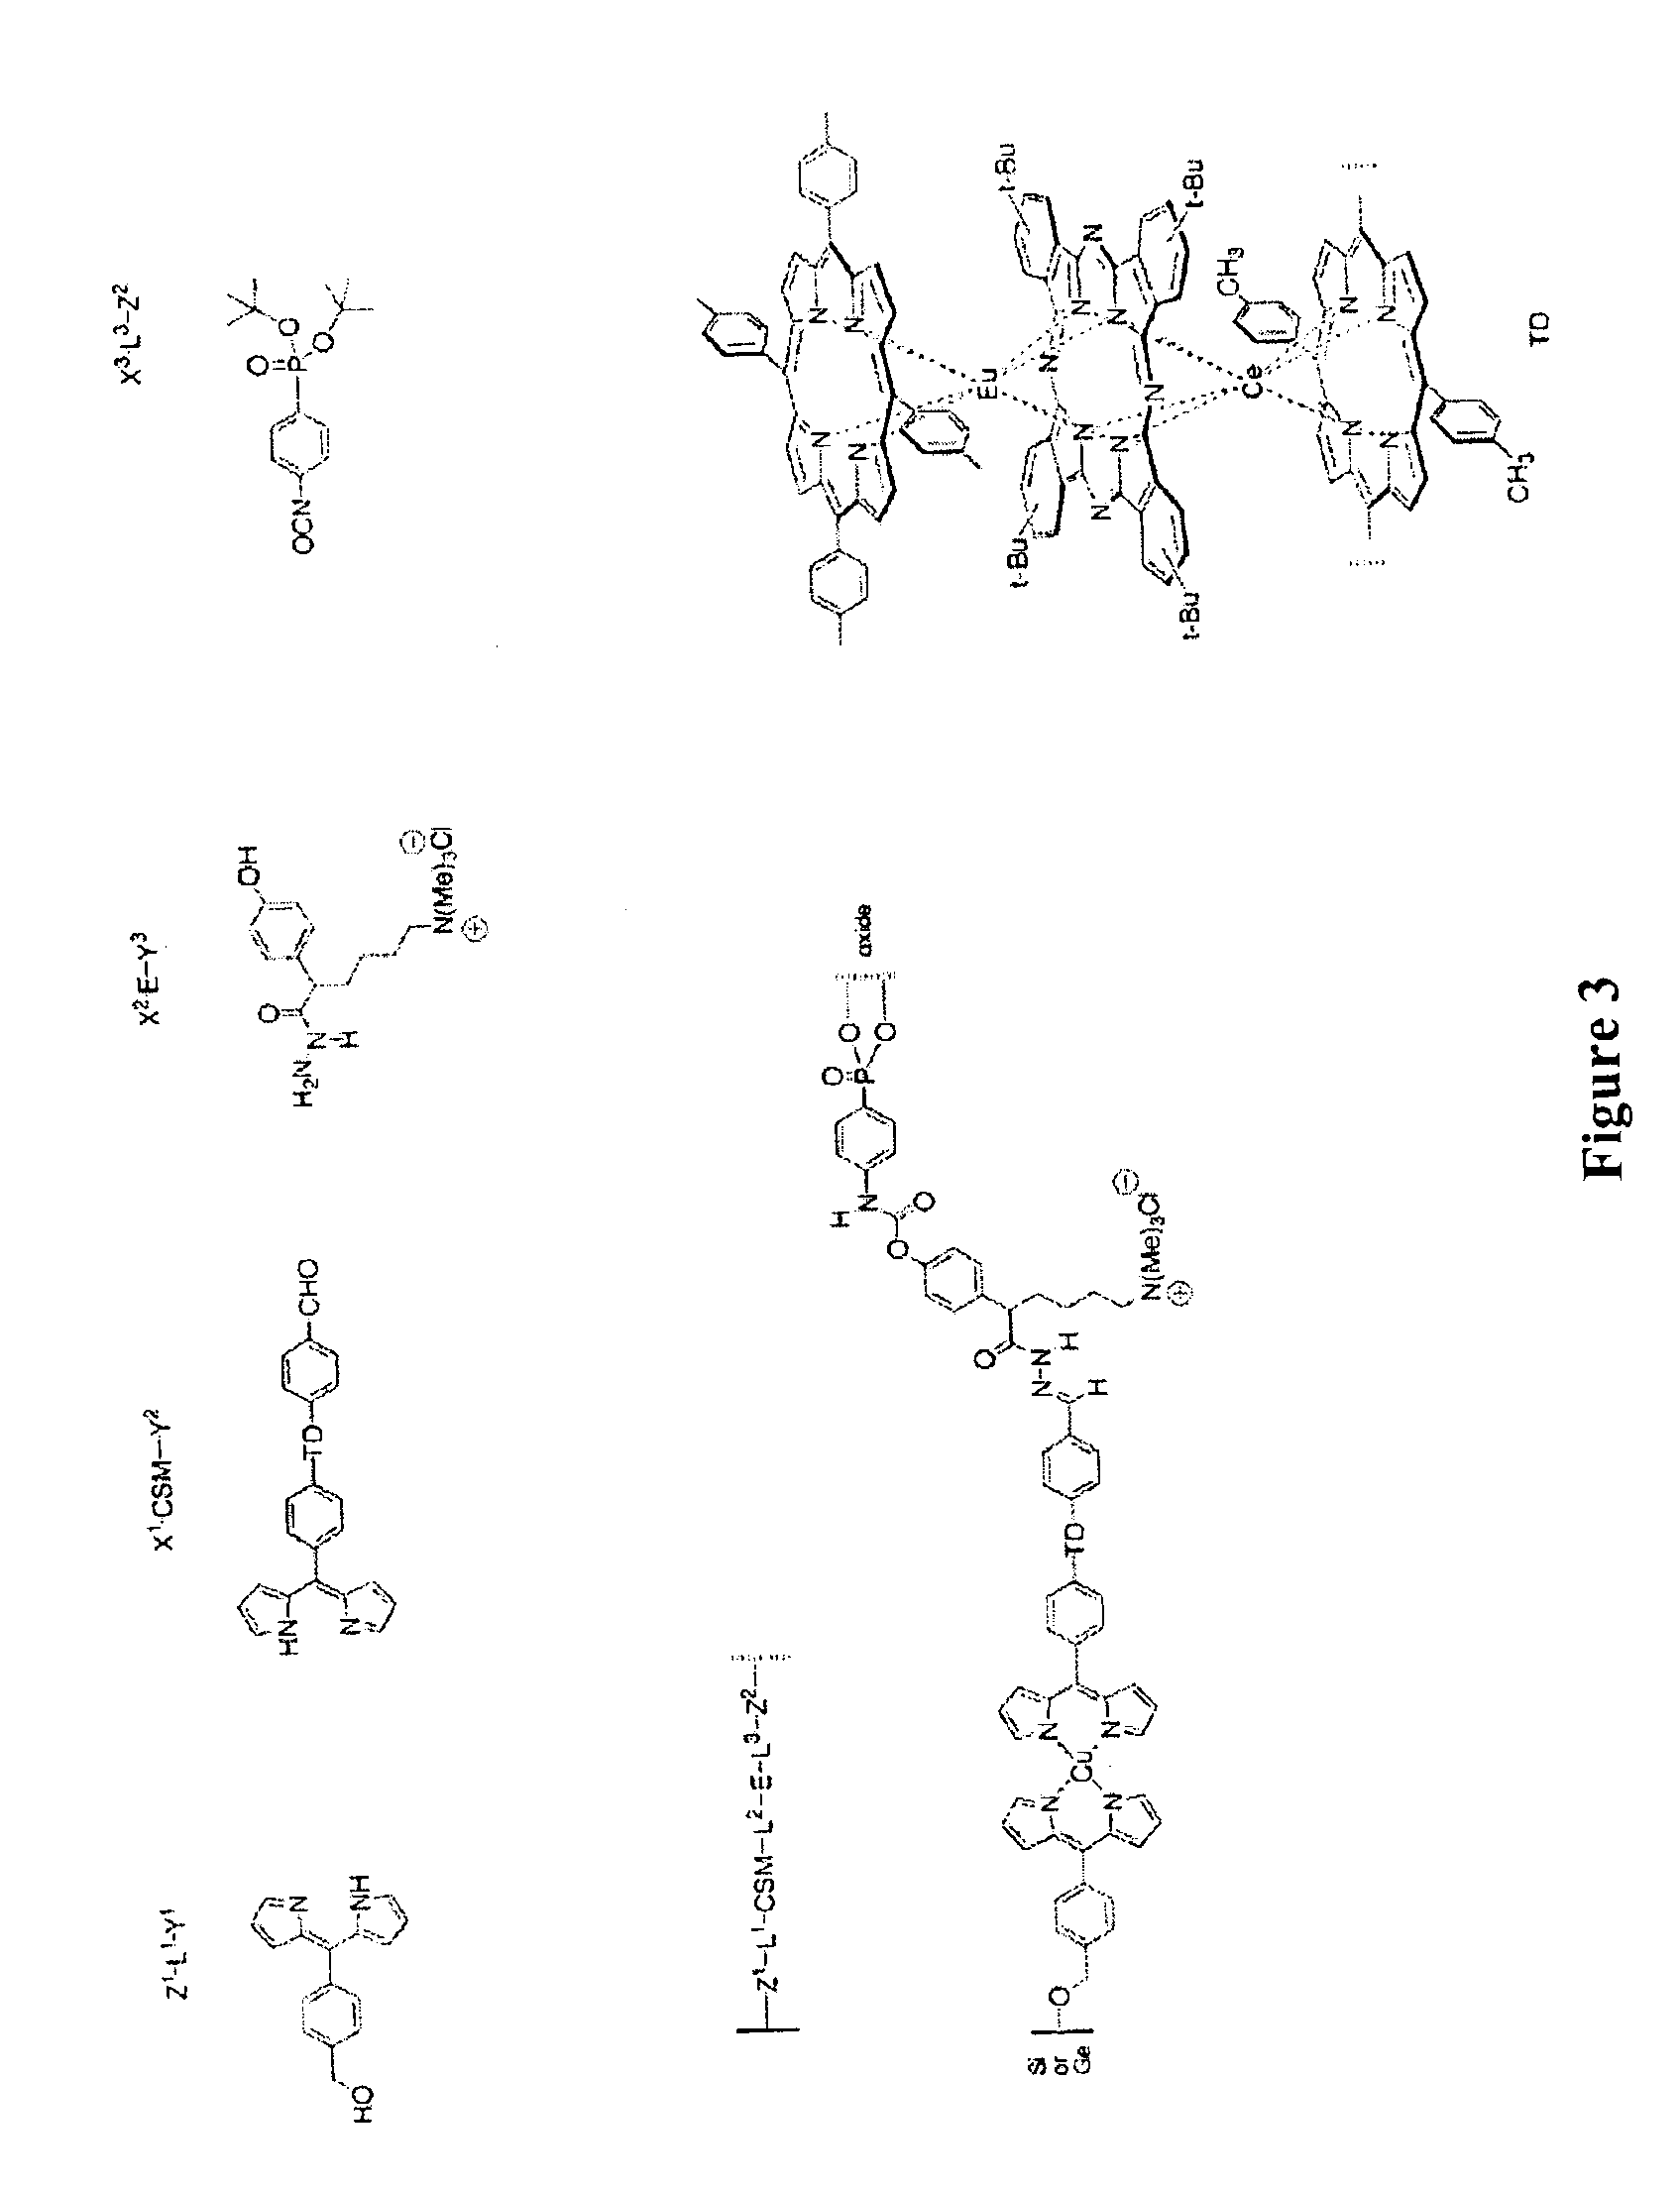 Method of making information storage devices by molecular photolithography